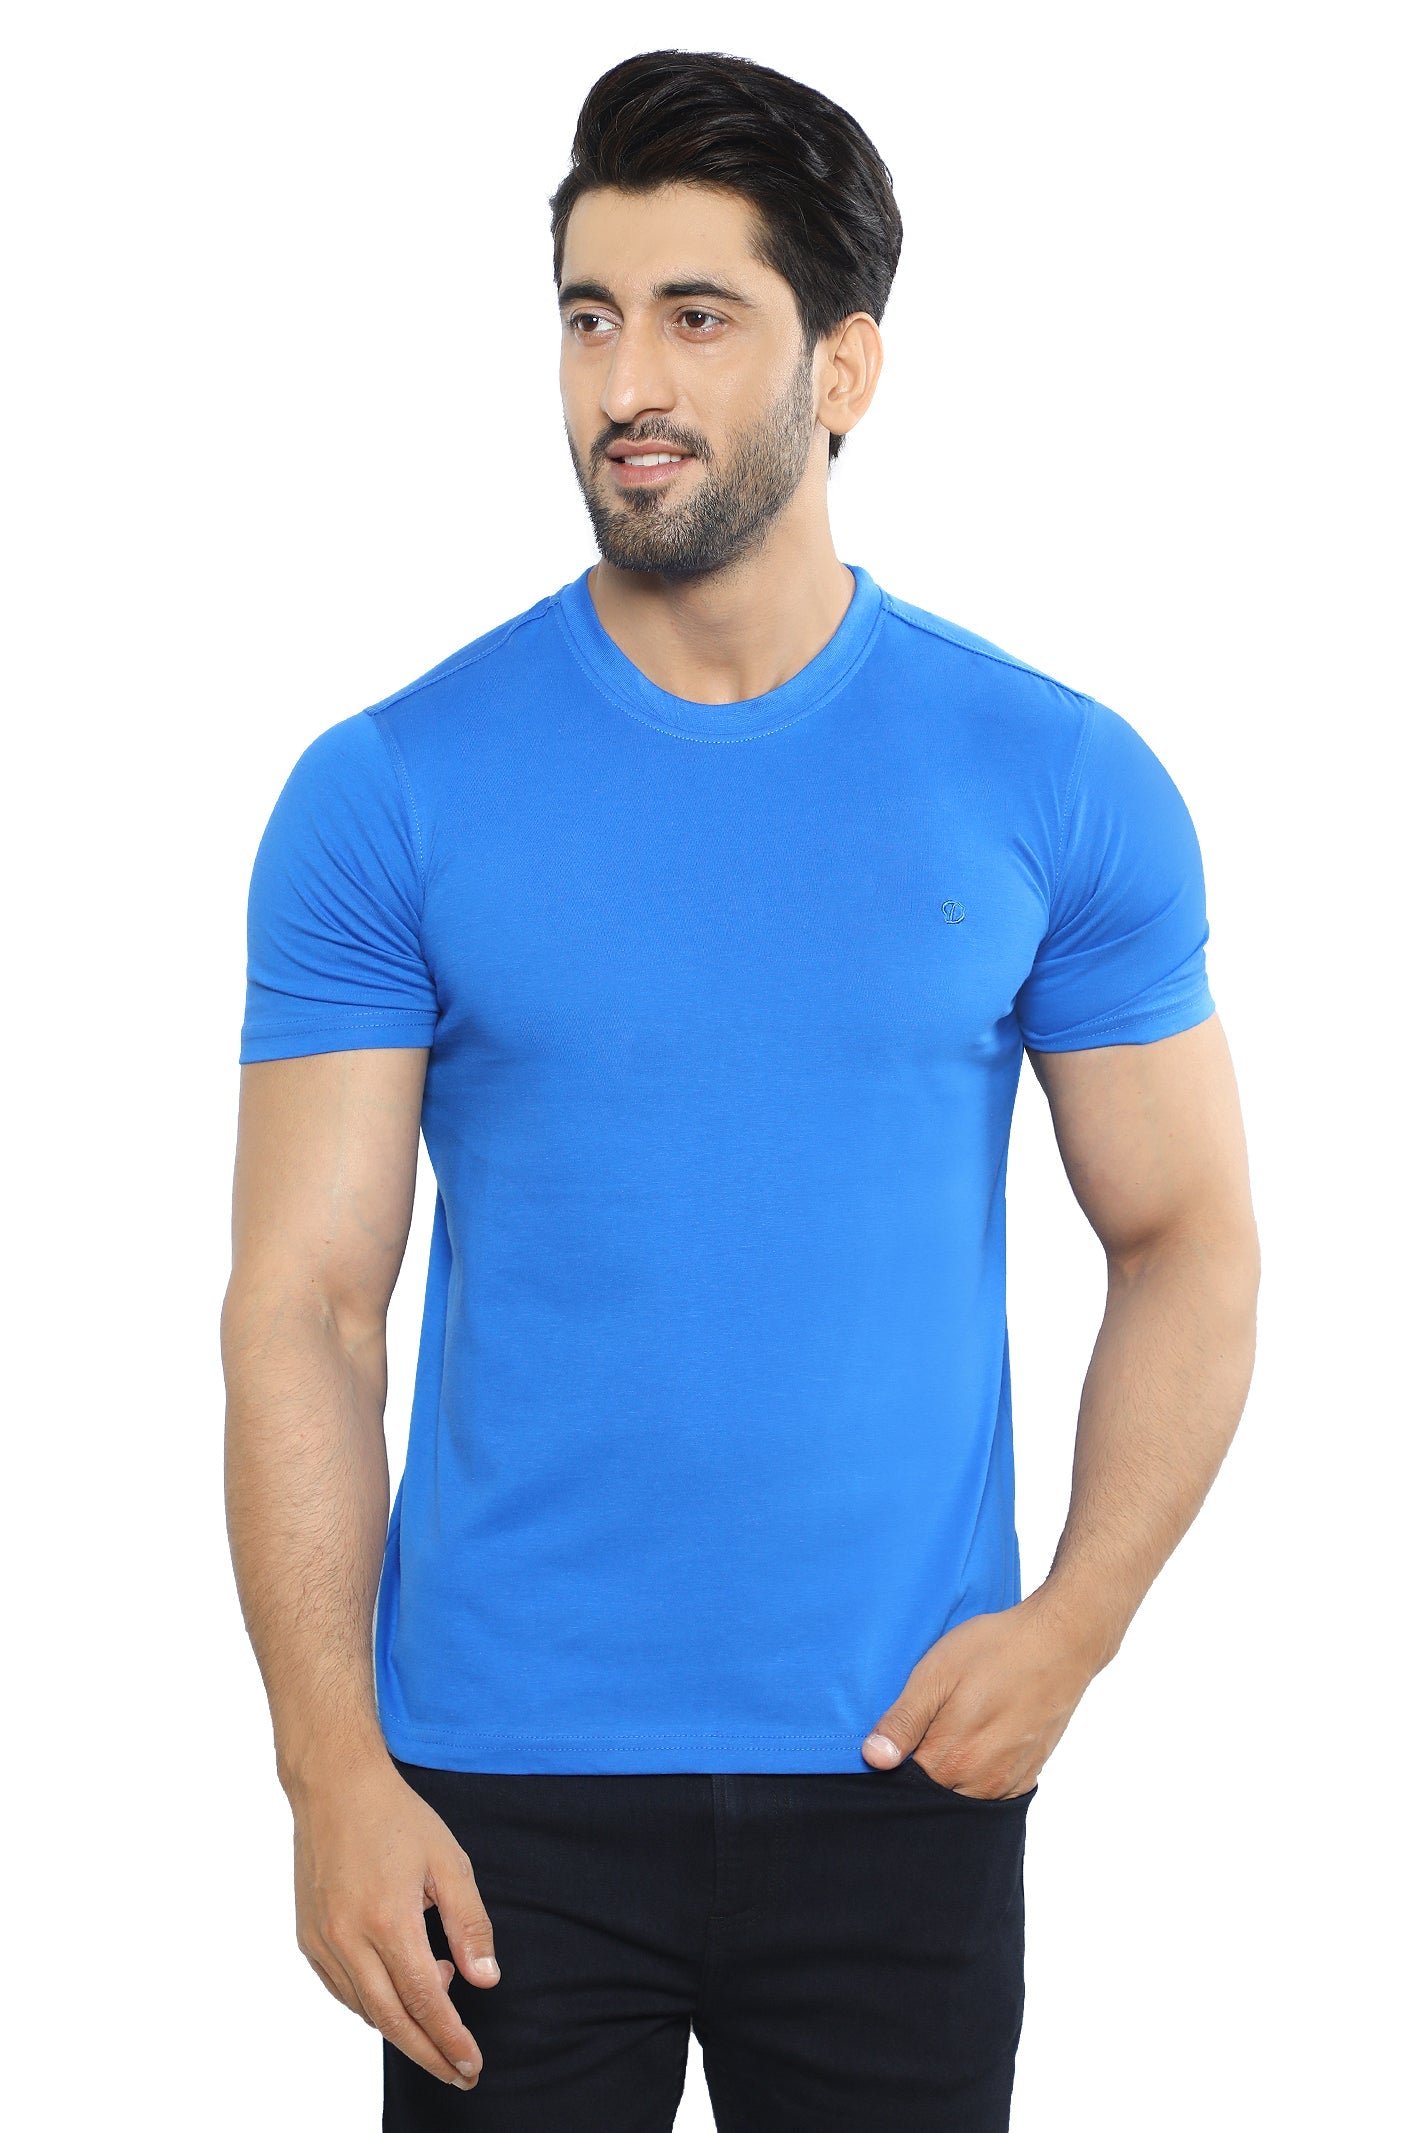 Diners Men's Round Neck T-Shirt SKU: NA856-R-BLUE - Diners